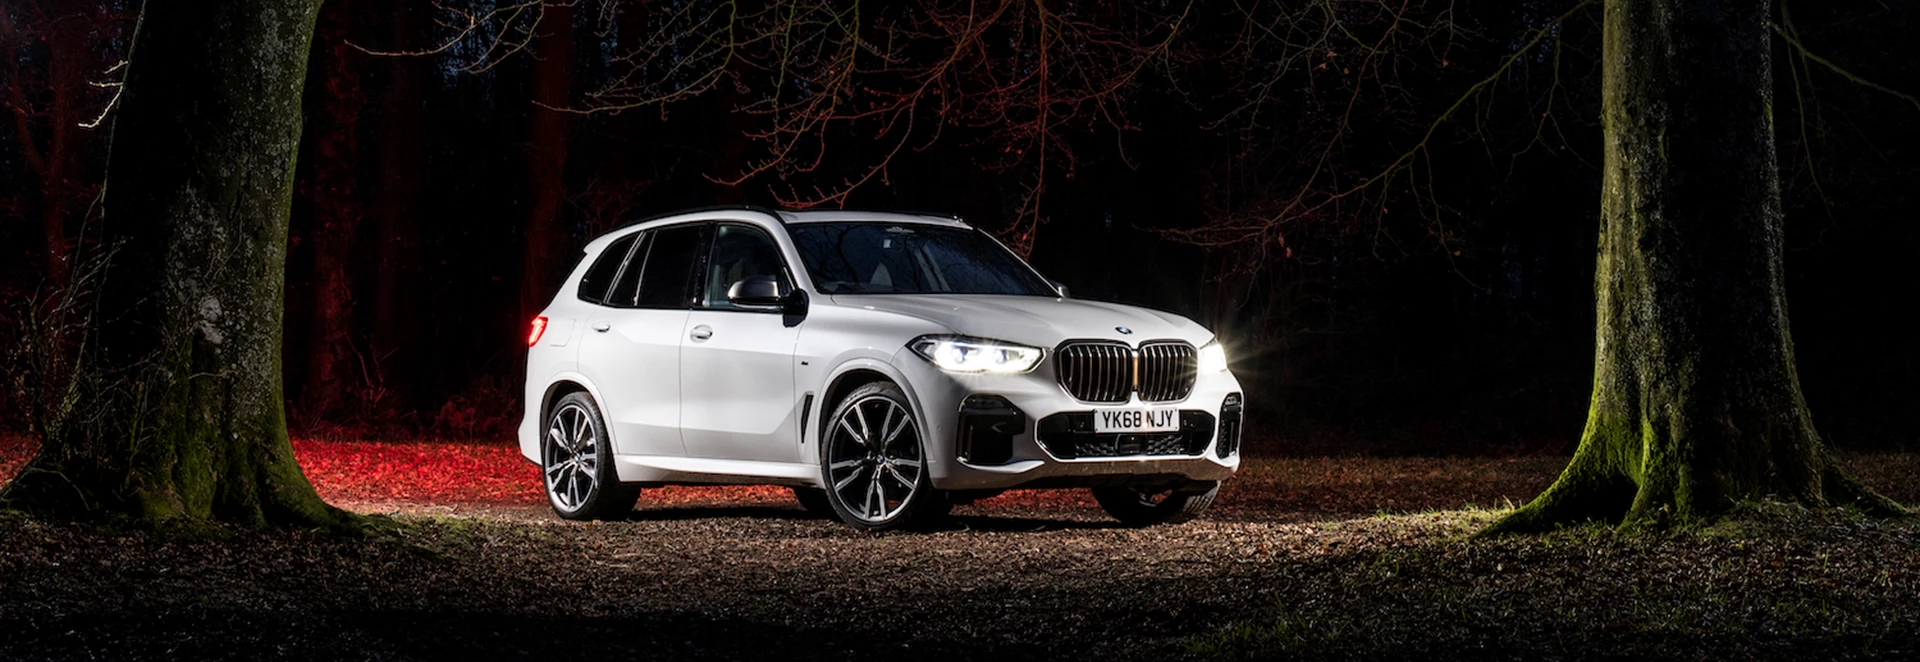 Why the BMW X5 is the perfect family car